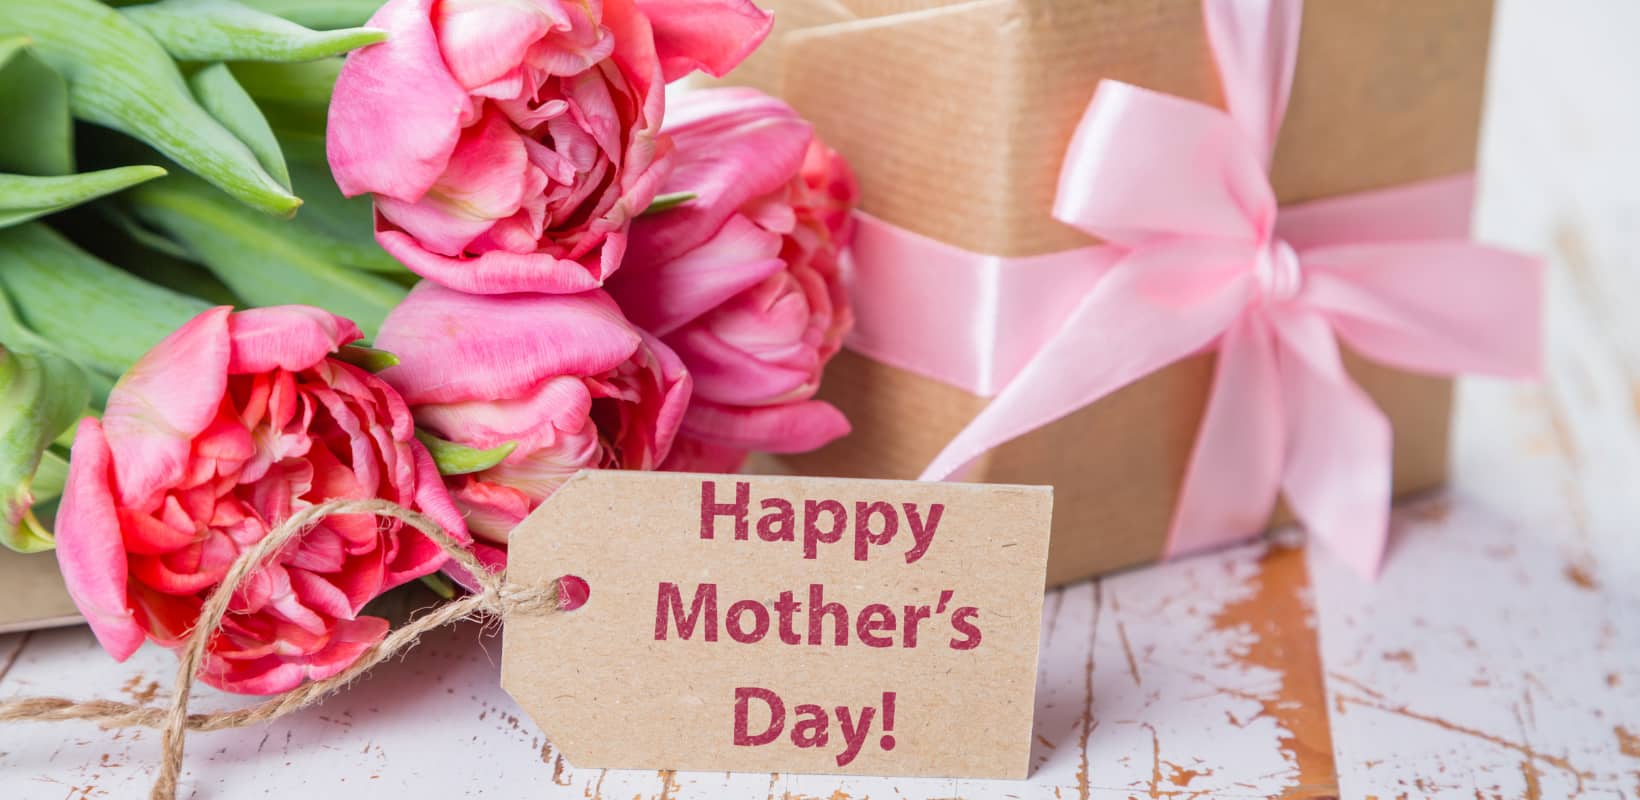 Make The Most Of Your Sales With These Mother's Day Marketing Ideas